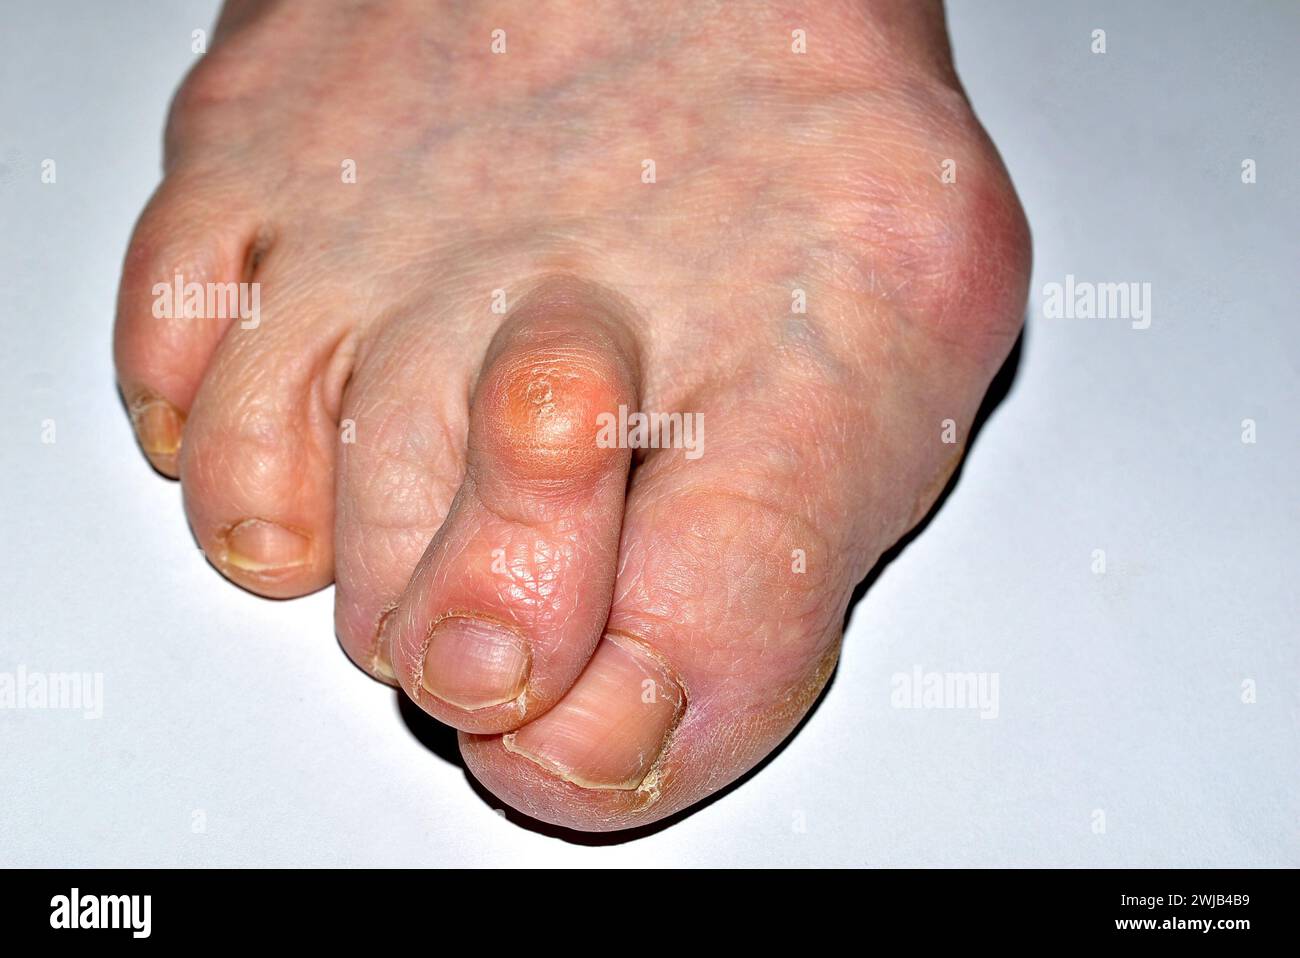 The picture shows a close-up of the right foot of the leg affected by the disease, the hallux valgus, the toes are twisted. Stock Photo